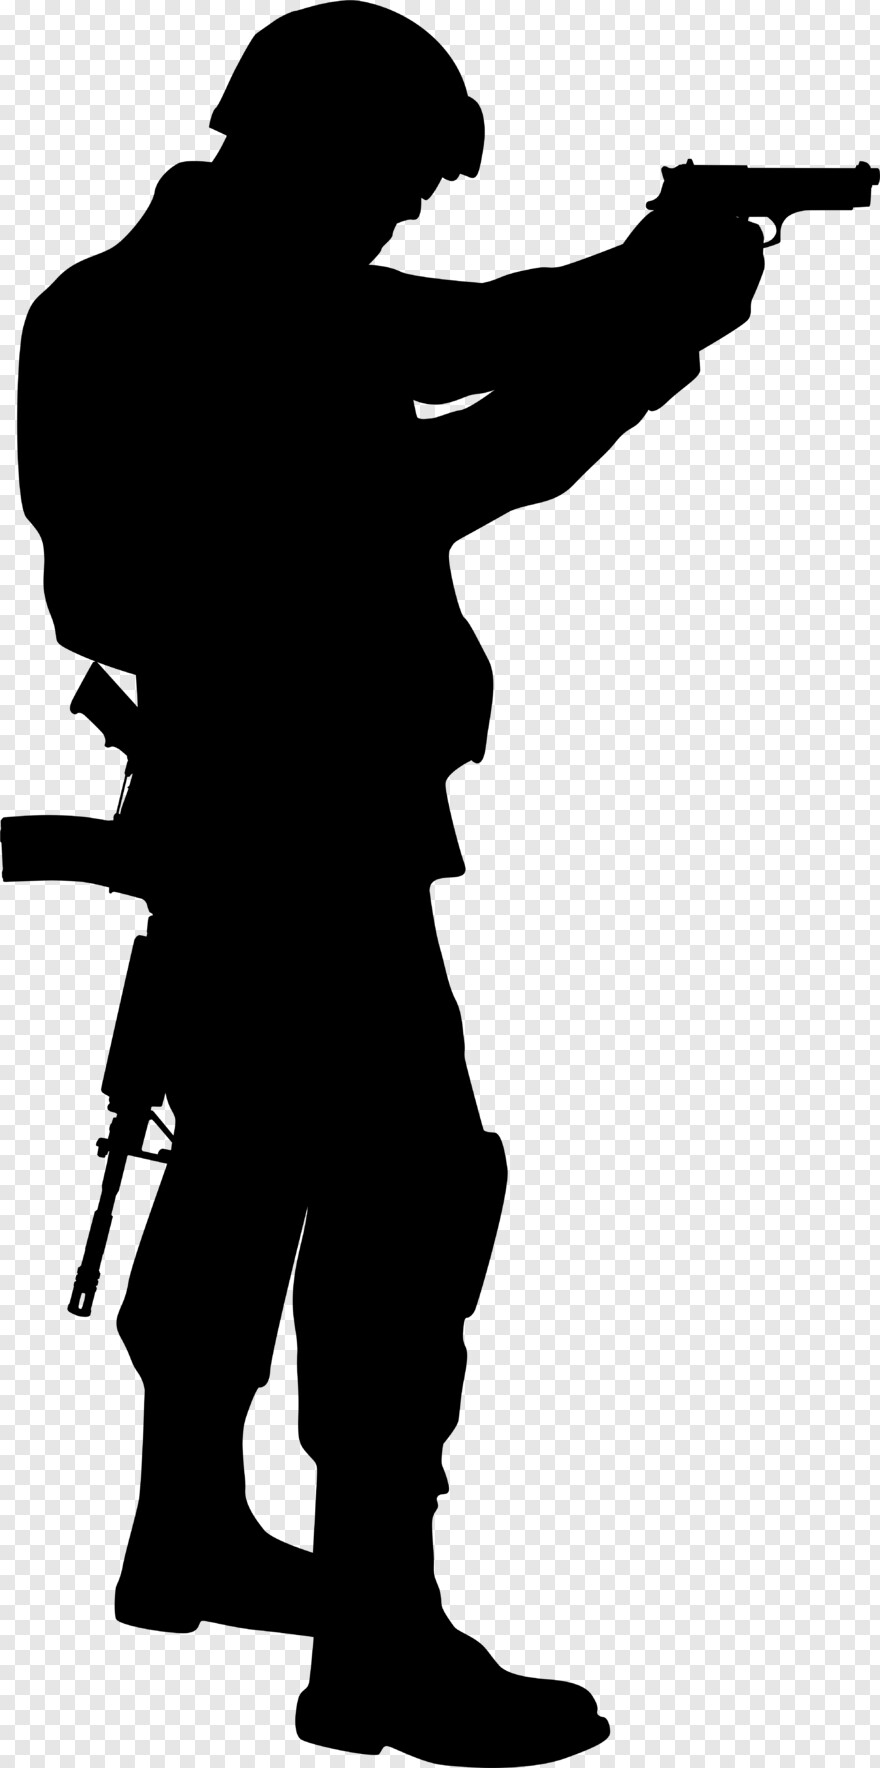 soldier-silhouette # 476525